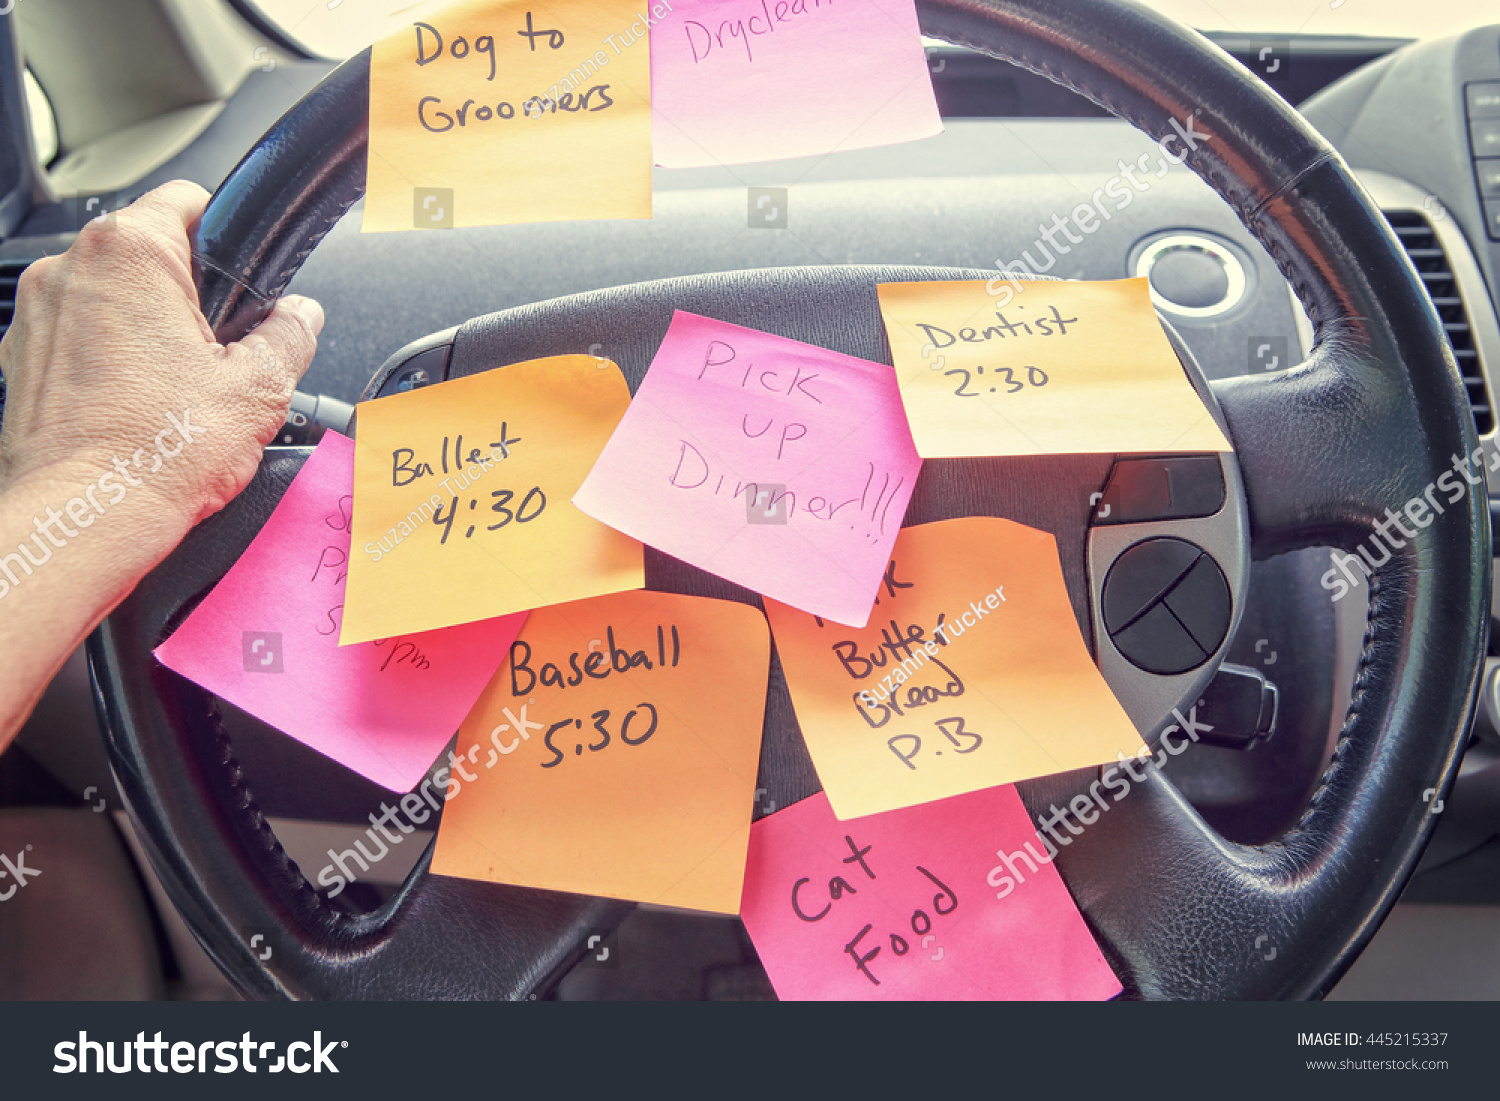 Steering wheel covered in notes as a reminder of errands to do #445215337